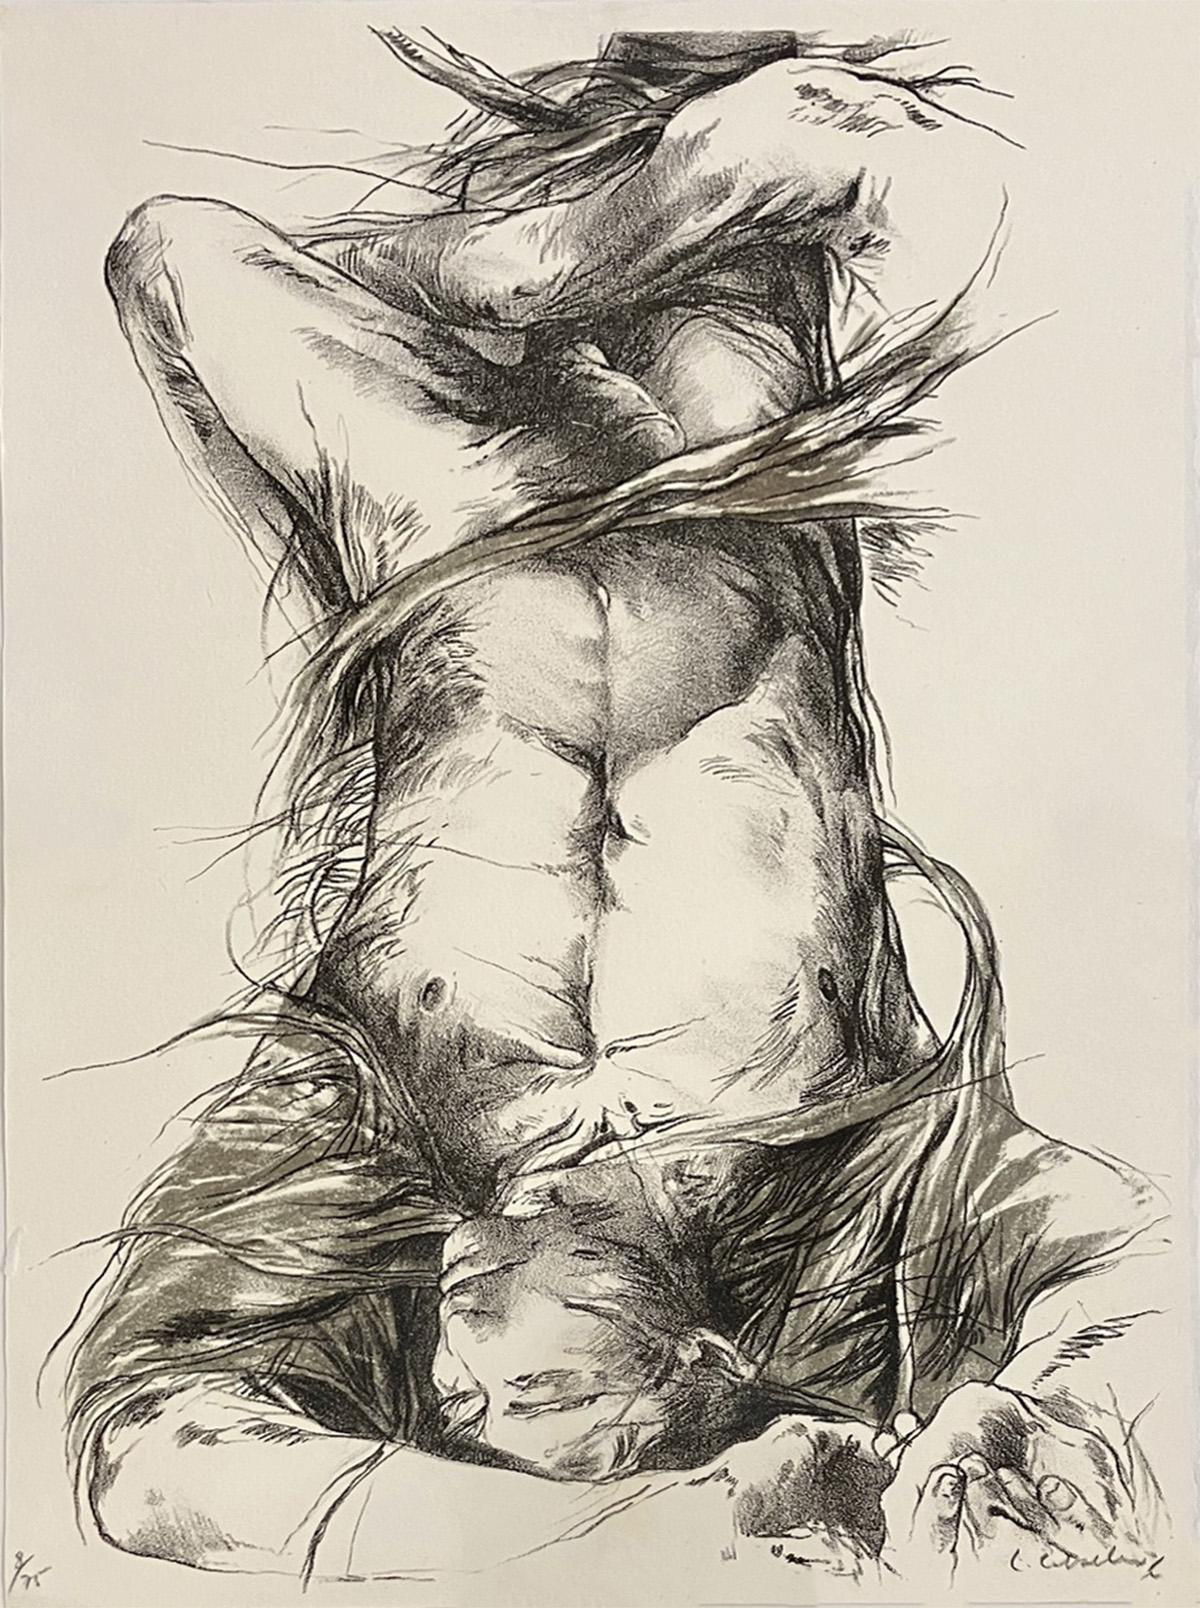 Luis Caballero Nude Print - Unititled male nude limited edition print